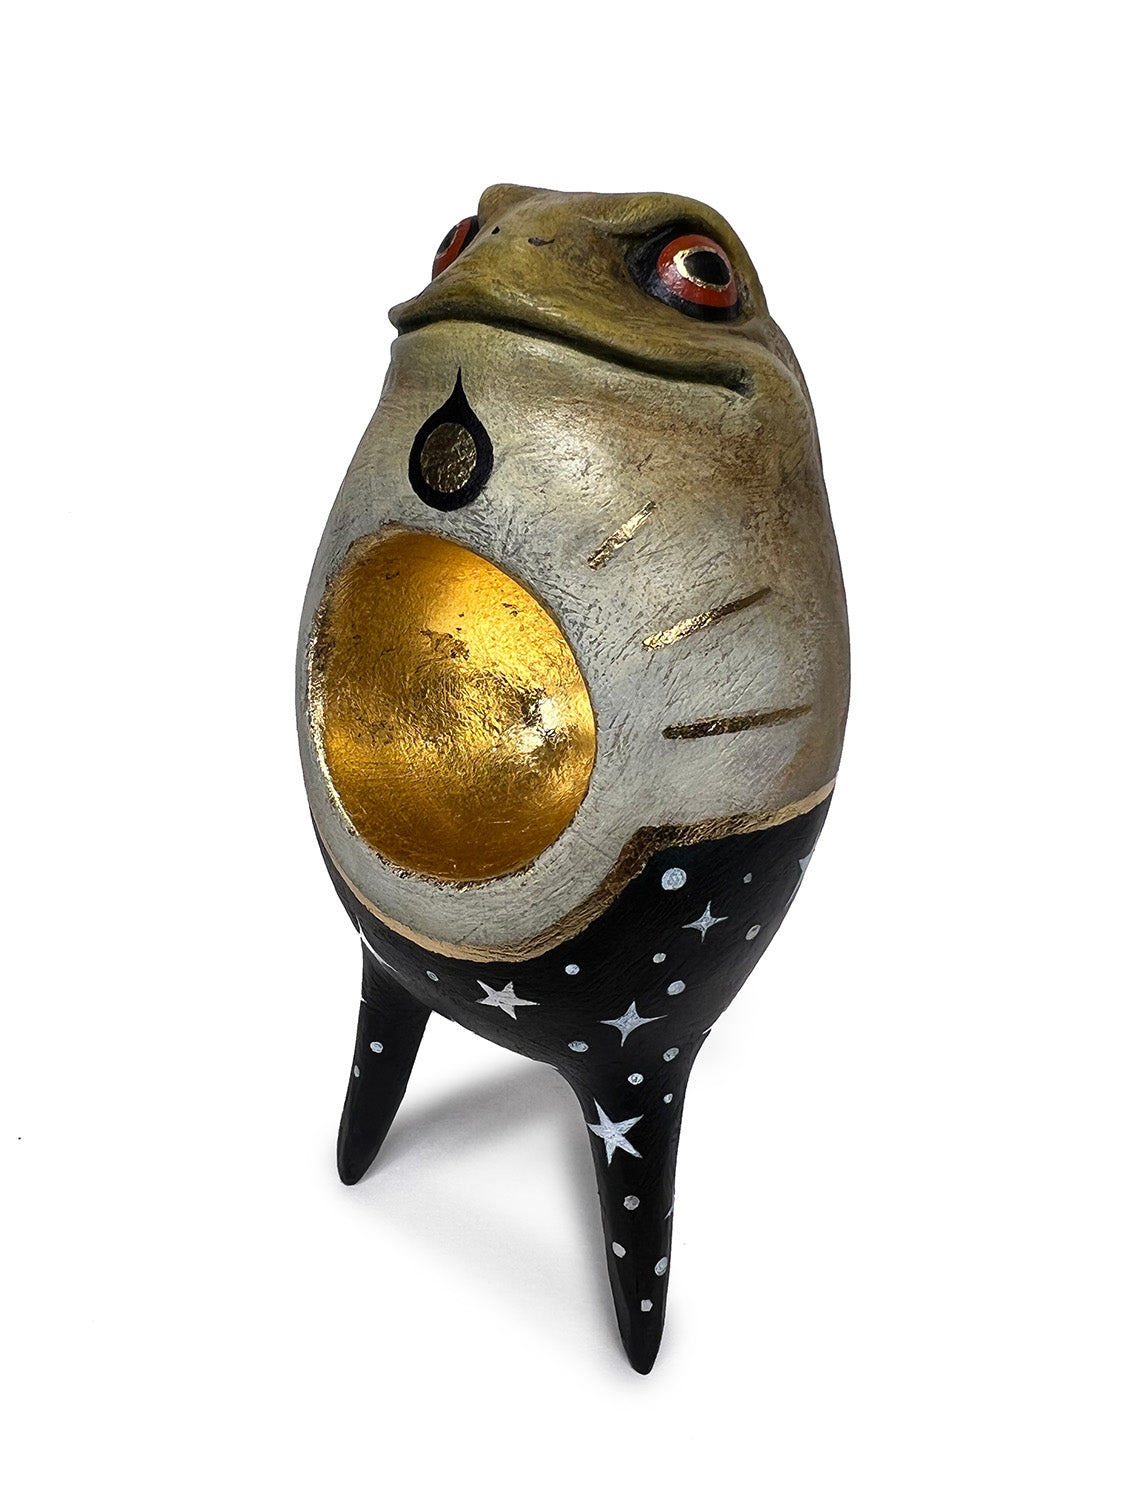 Cosmic Toad Reliquary